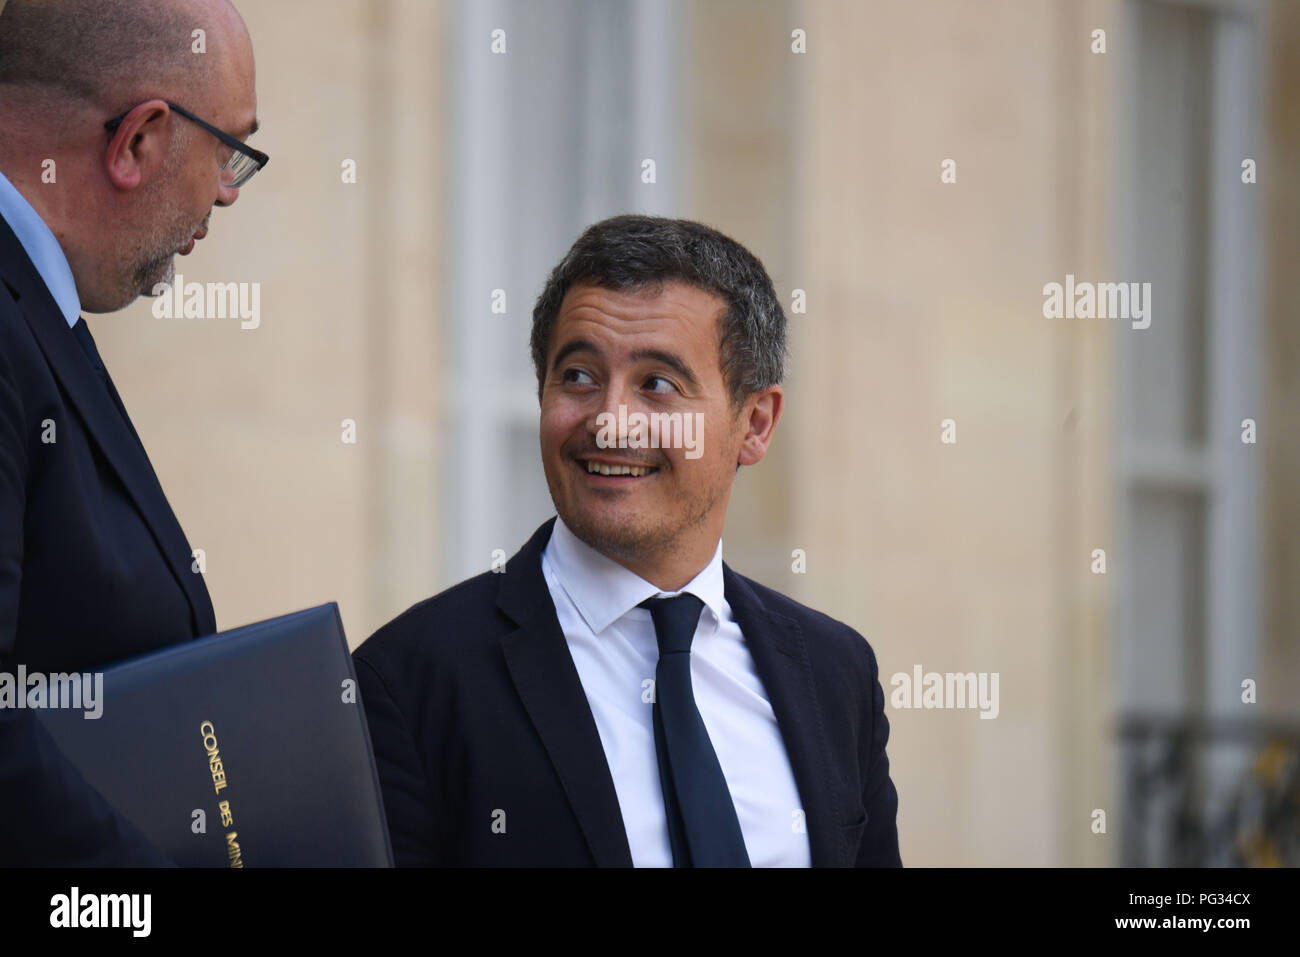 Paris France August 22 2018 Paris France French Minister Of Public Action And Accounts Gerald Darmanin